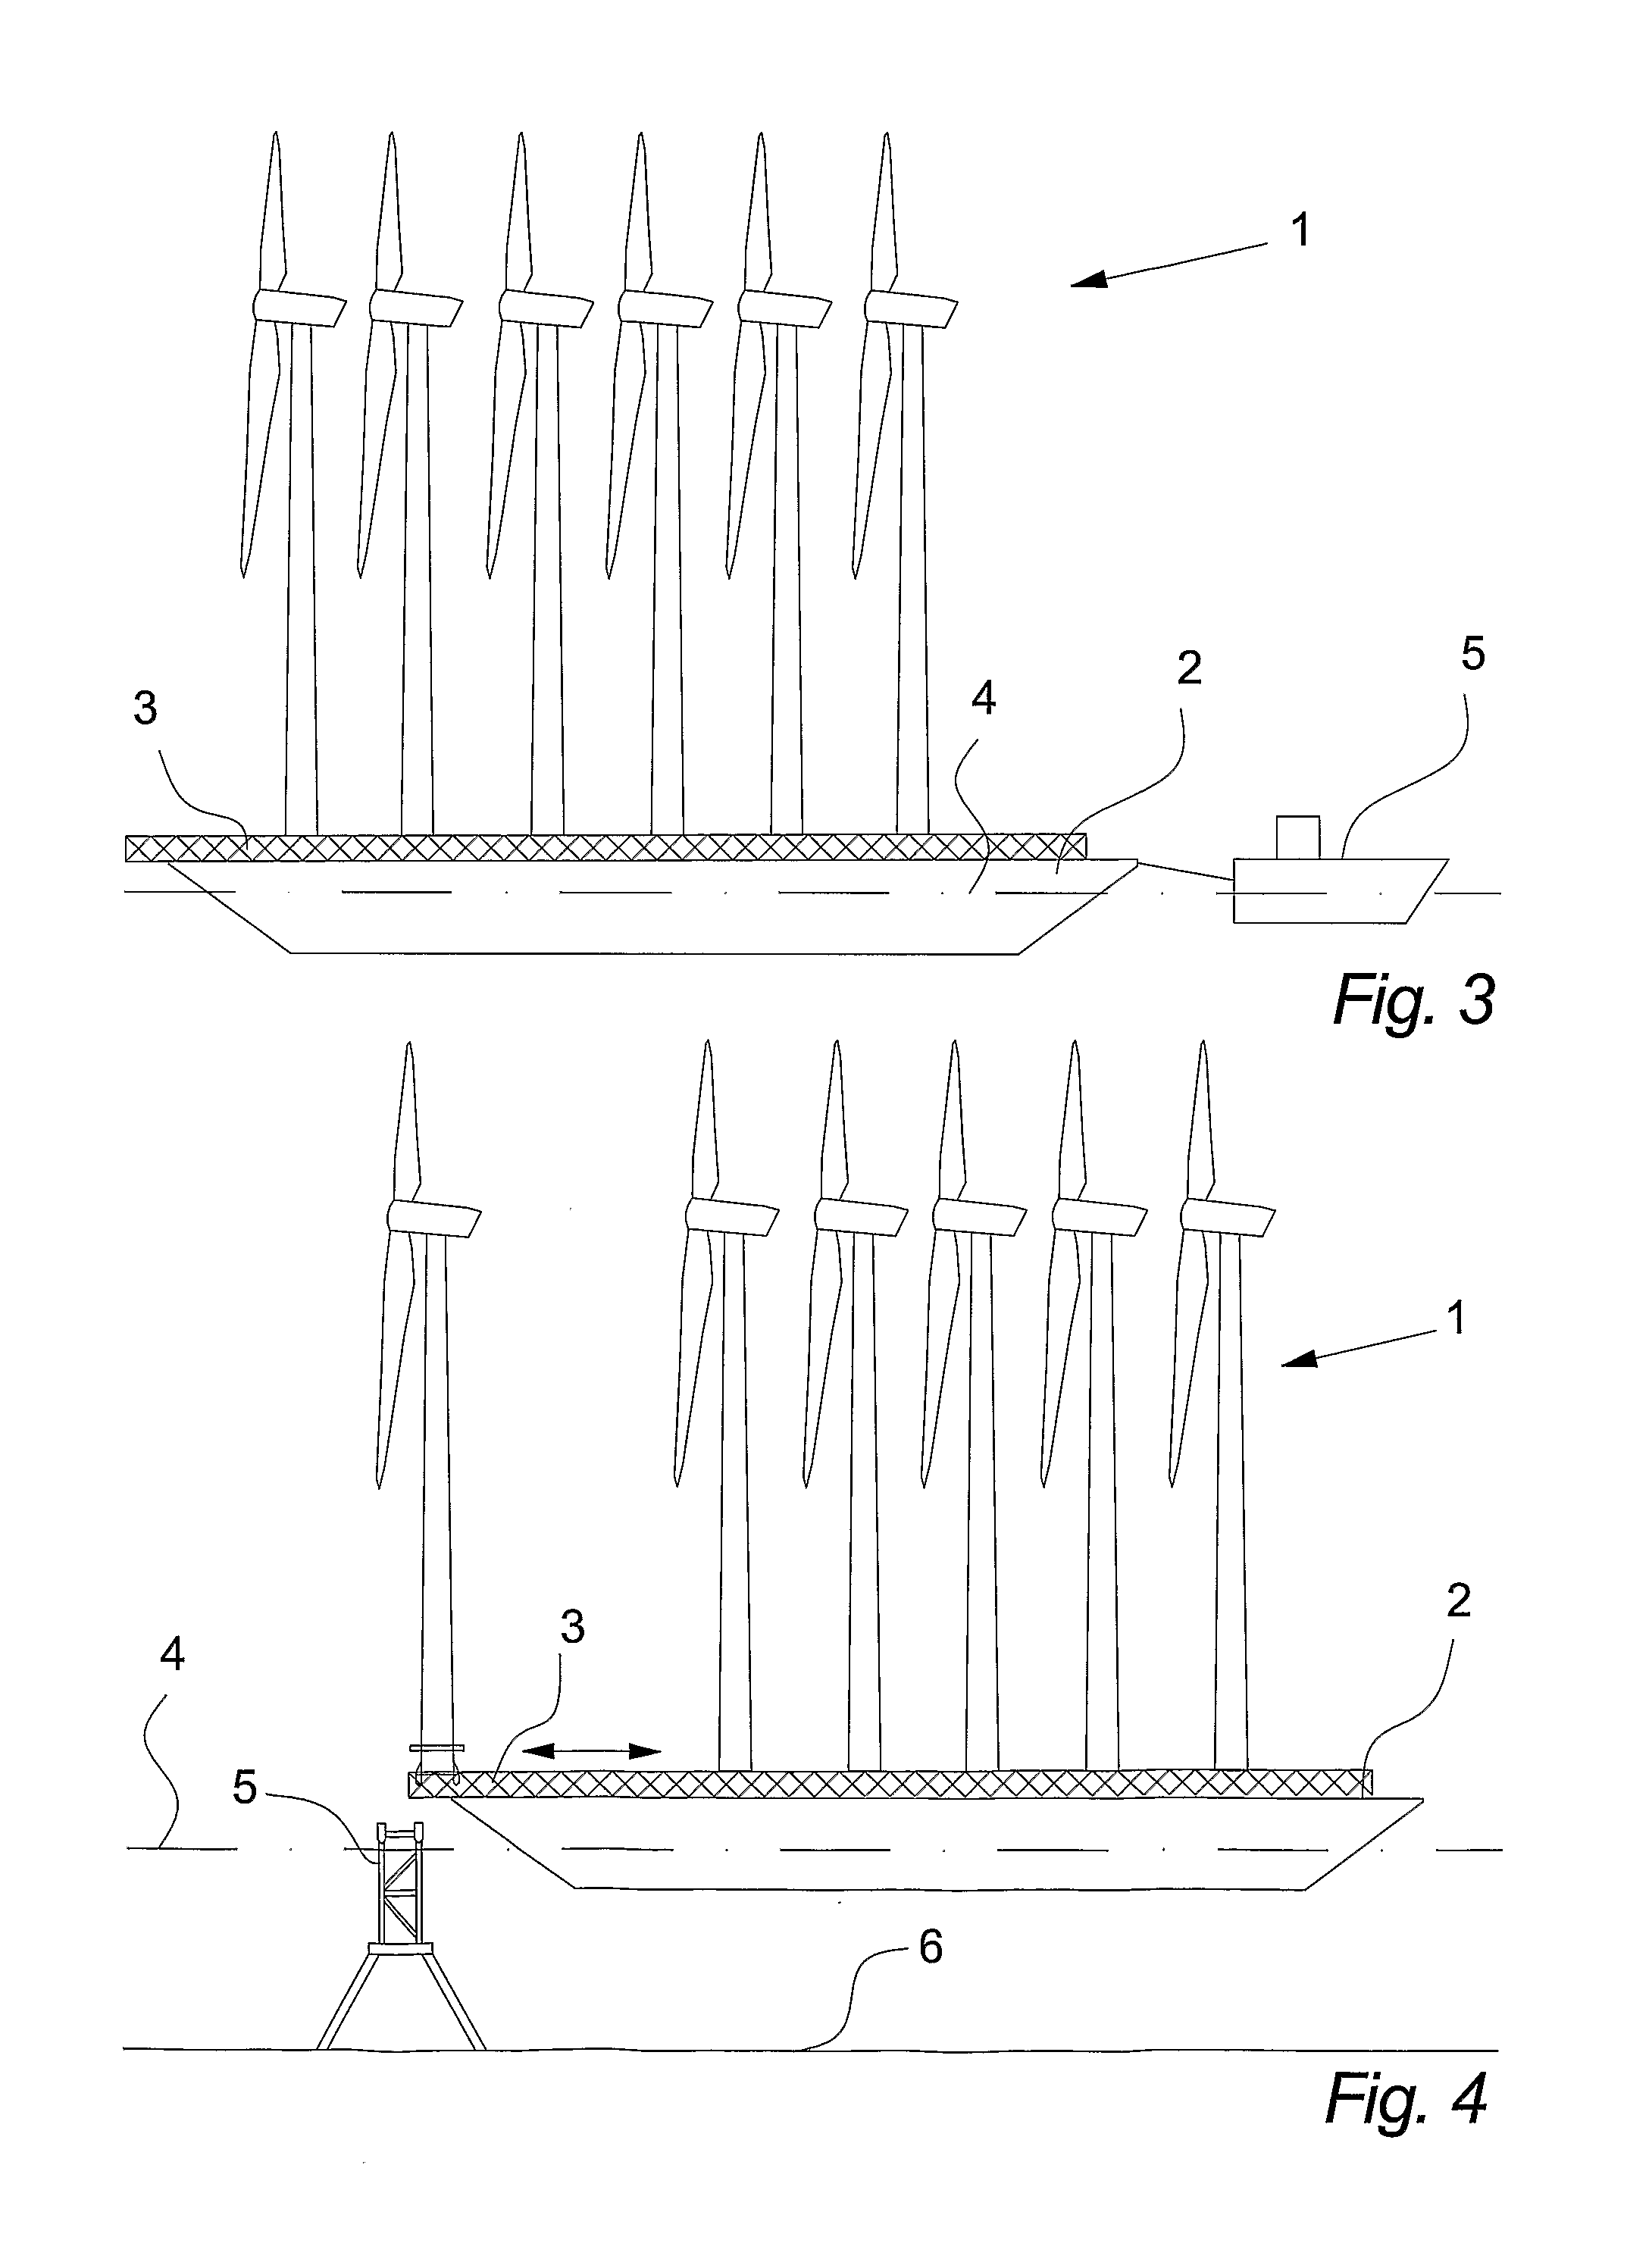 Method for installing an offshore wind turbine and a barge system